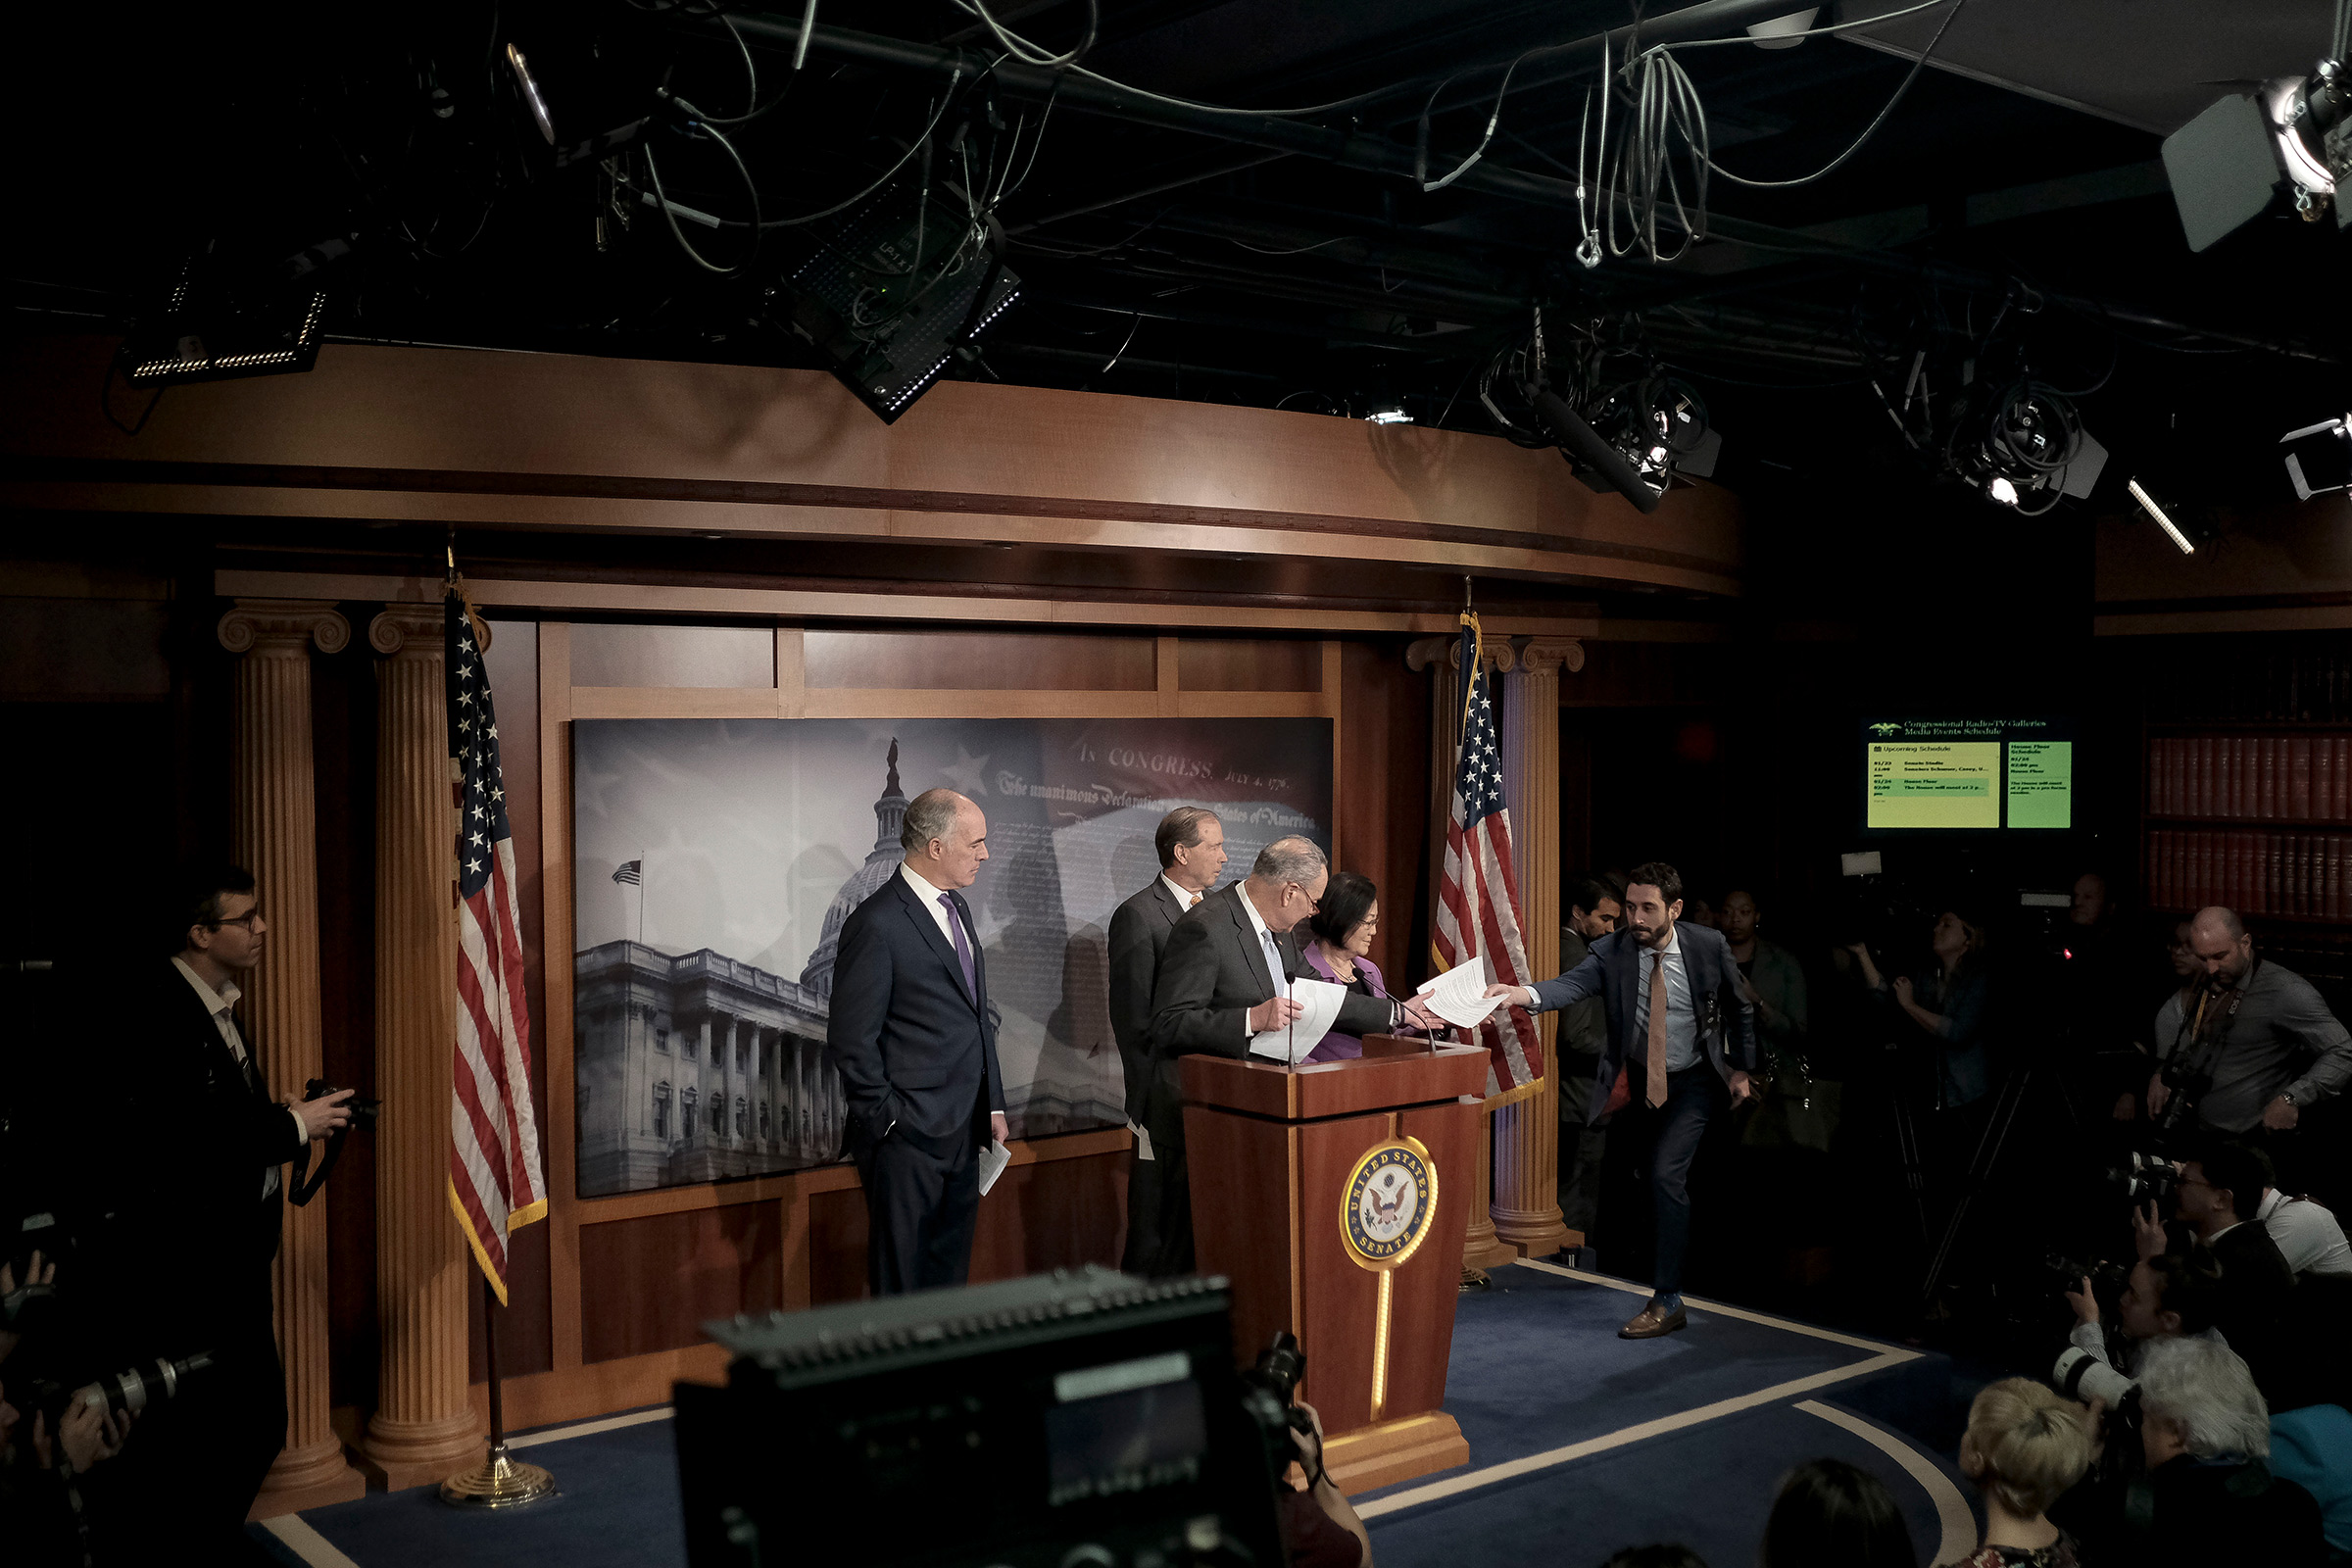 Senate Minority Leader Chuck Schumer (D-N.Y.) along with other senate democratic leaders speak to reporters at a press conference before the senate impeachment trial at the Capitol in Washington, D.C. on Jan. 23, 2020. (Gabriella Demczuk for TIME)